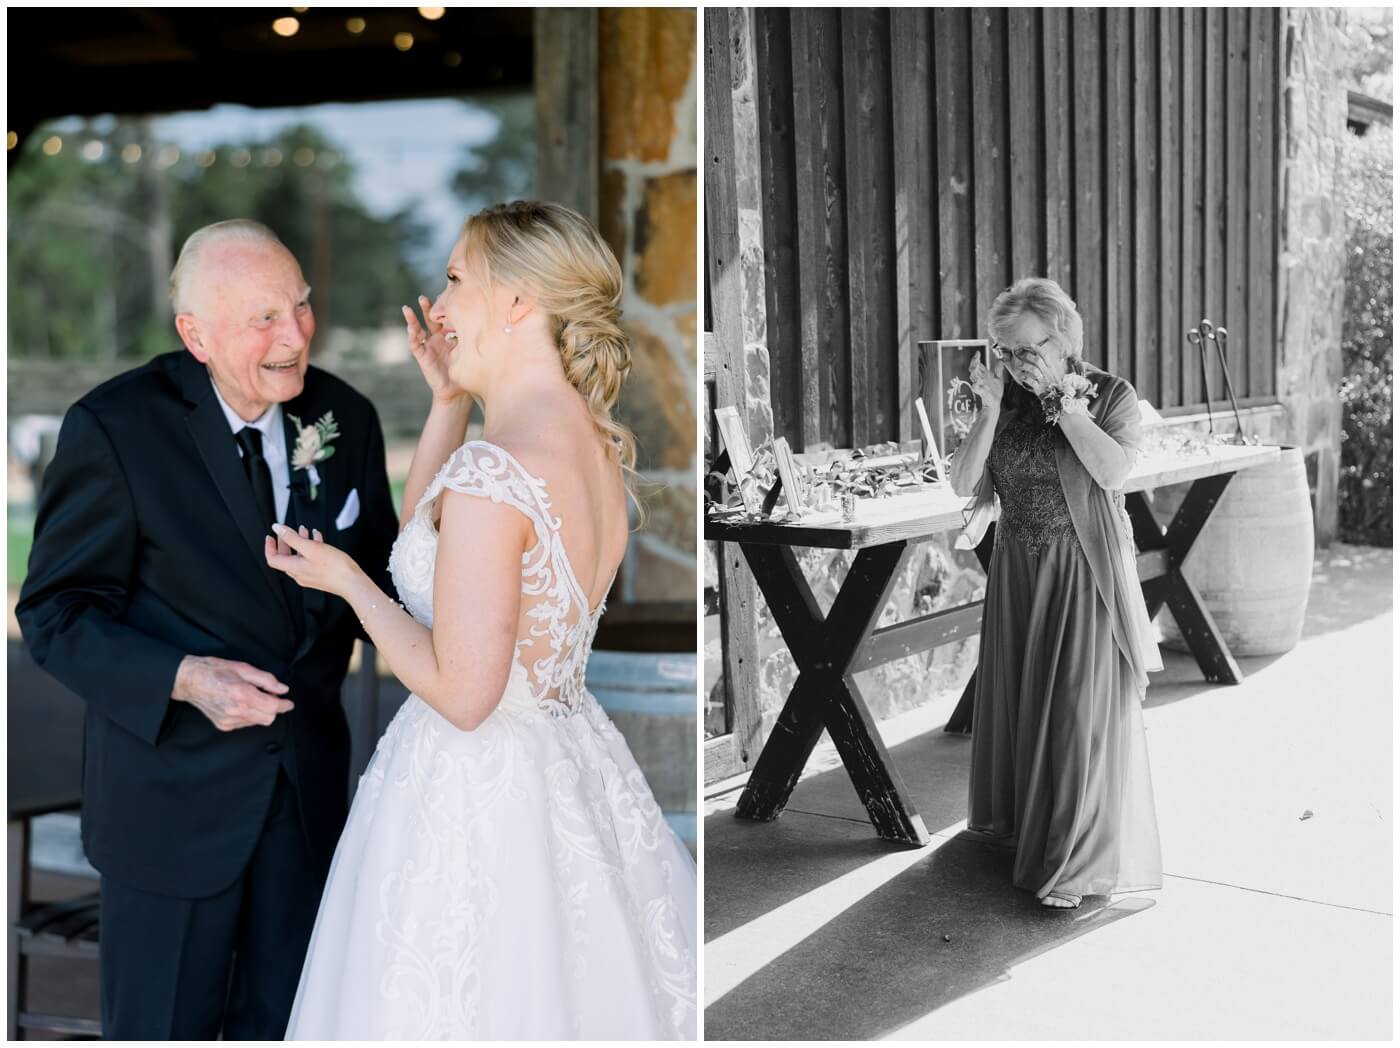 A bride shares a first look with her grandfather on her wedding day.